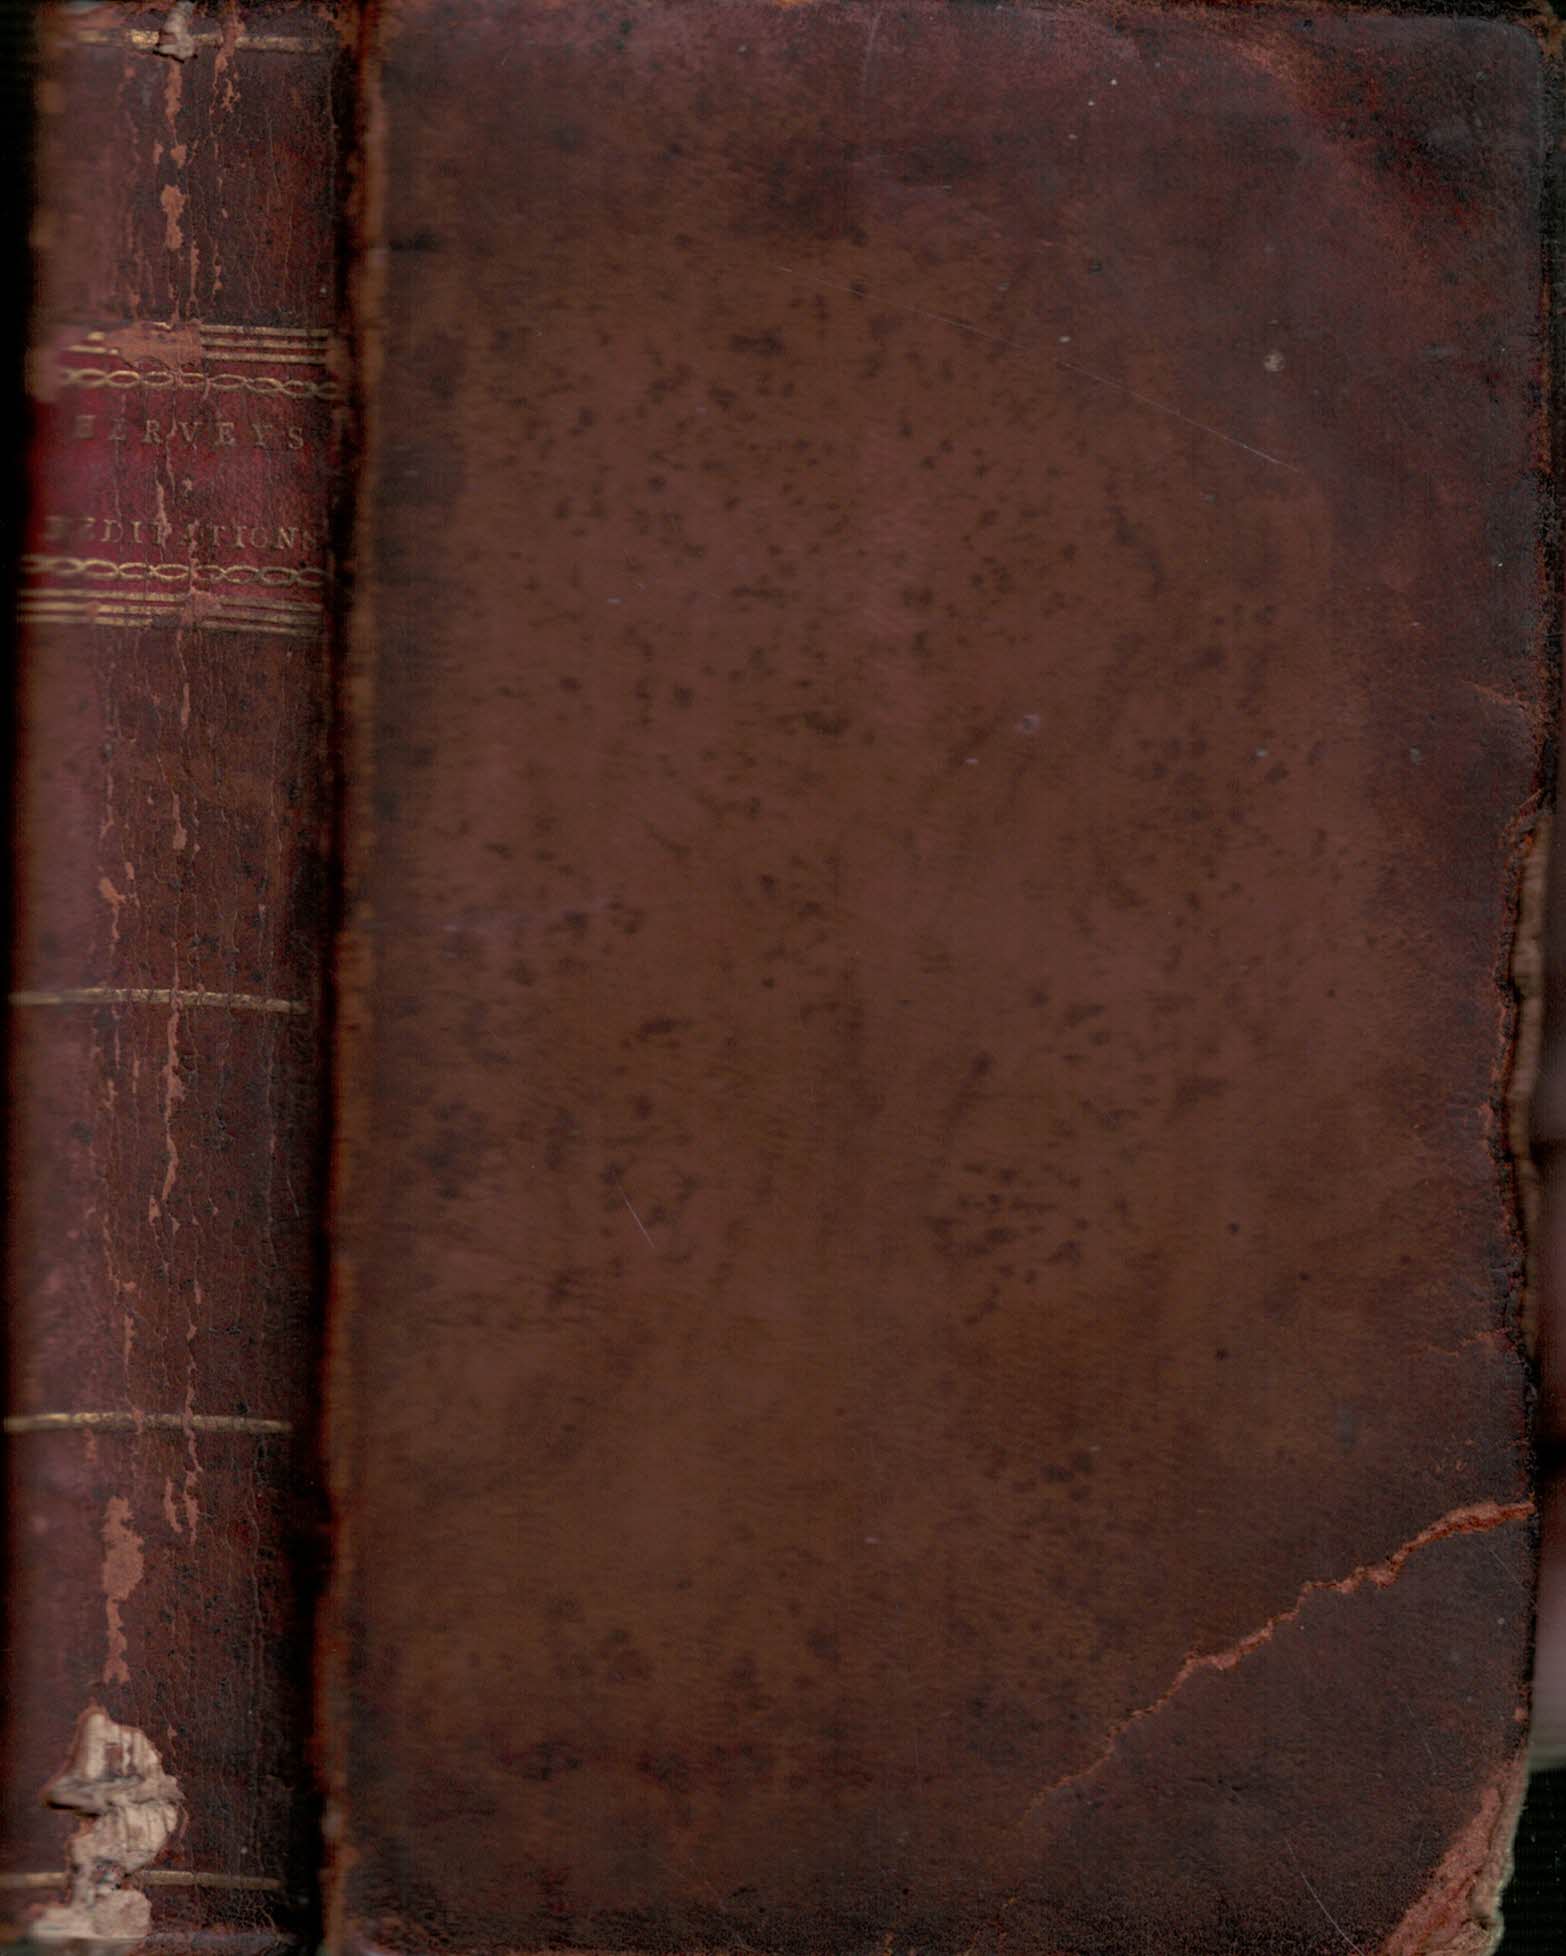 Meditations and Contemplations. Two Volumes in One. 1805.